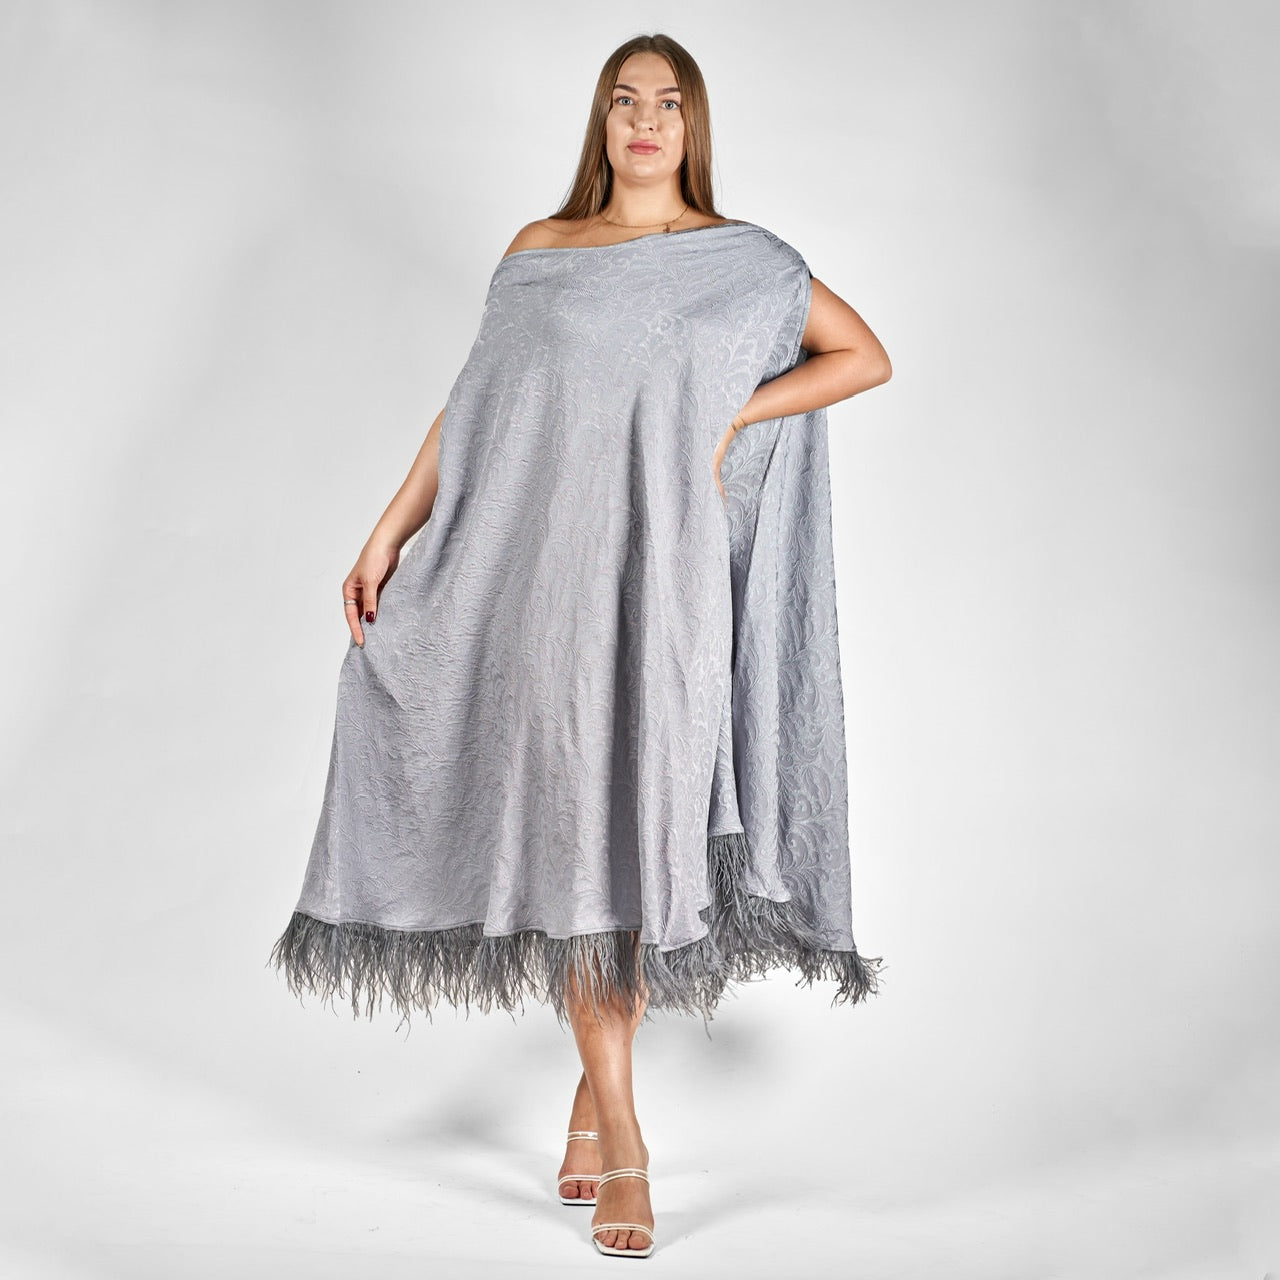 Soft grey dress with feathers - 2